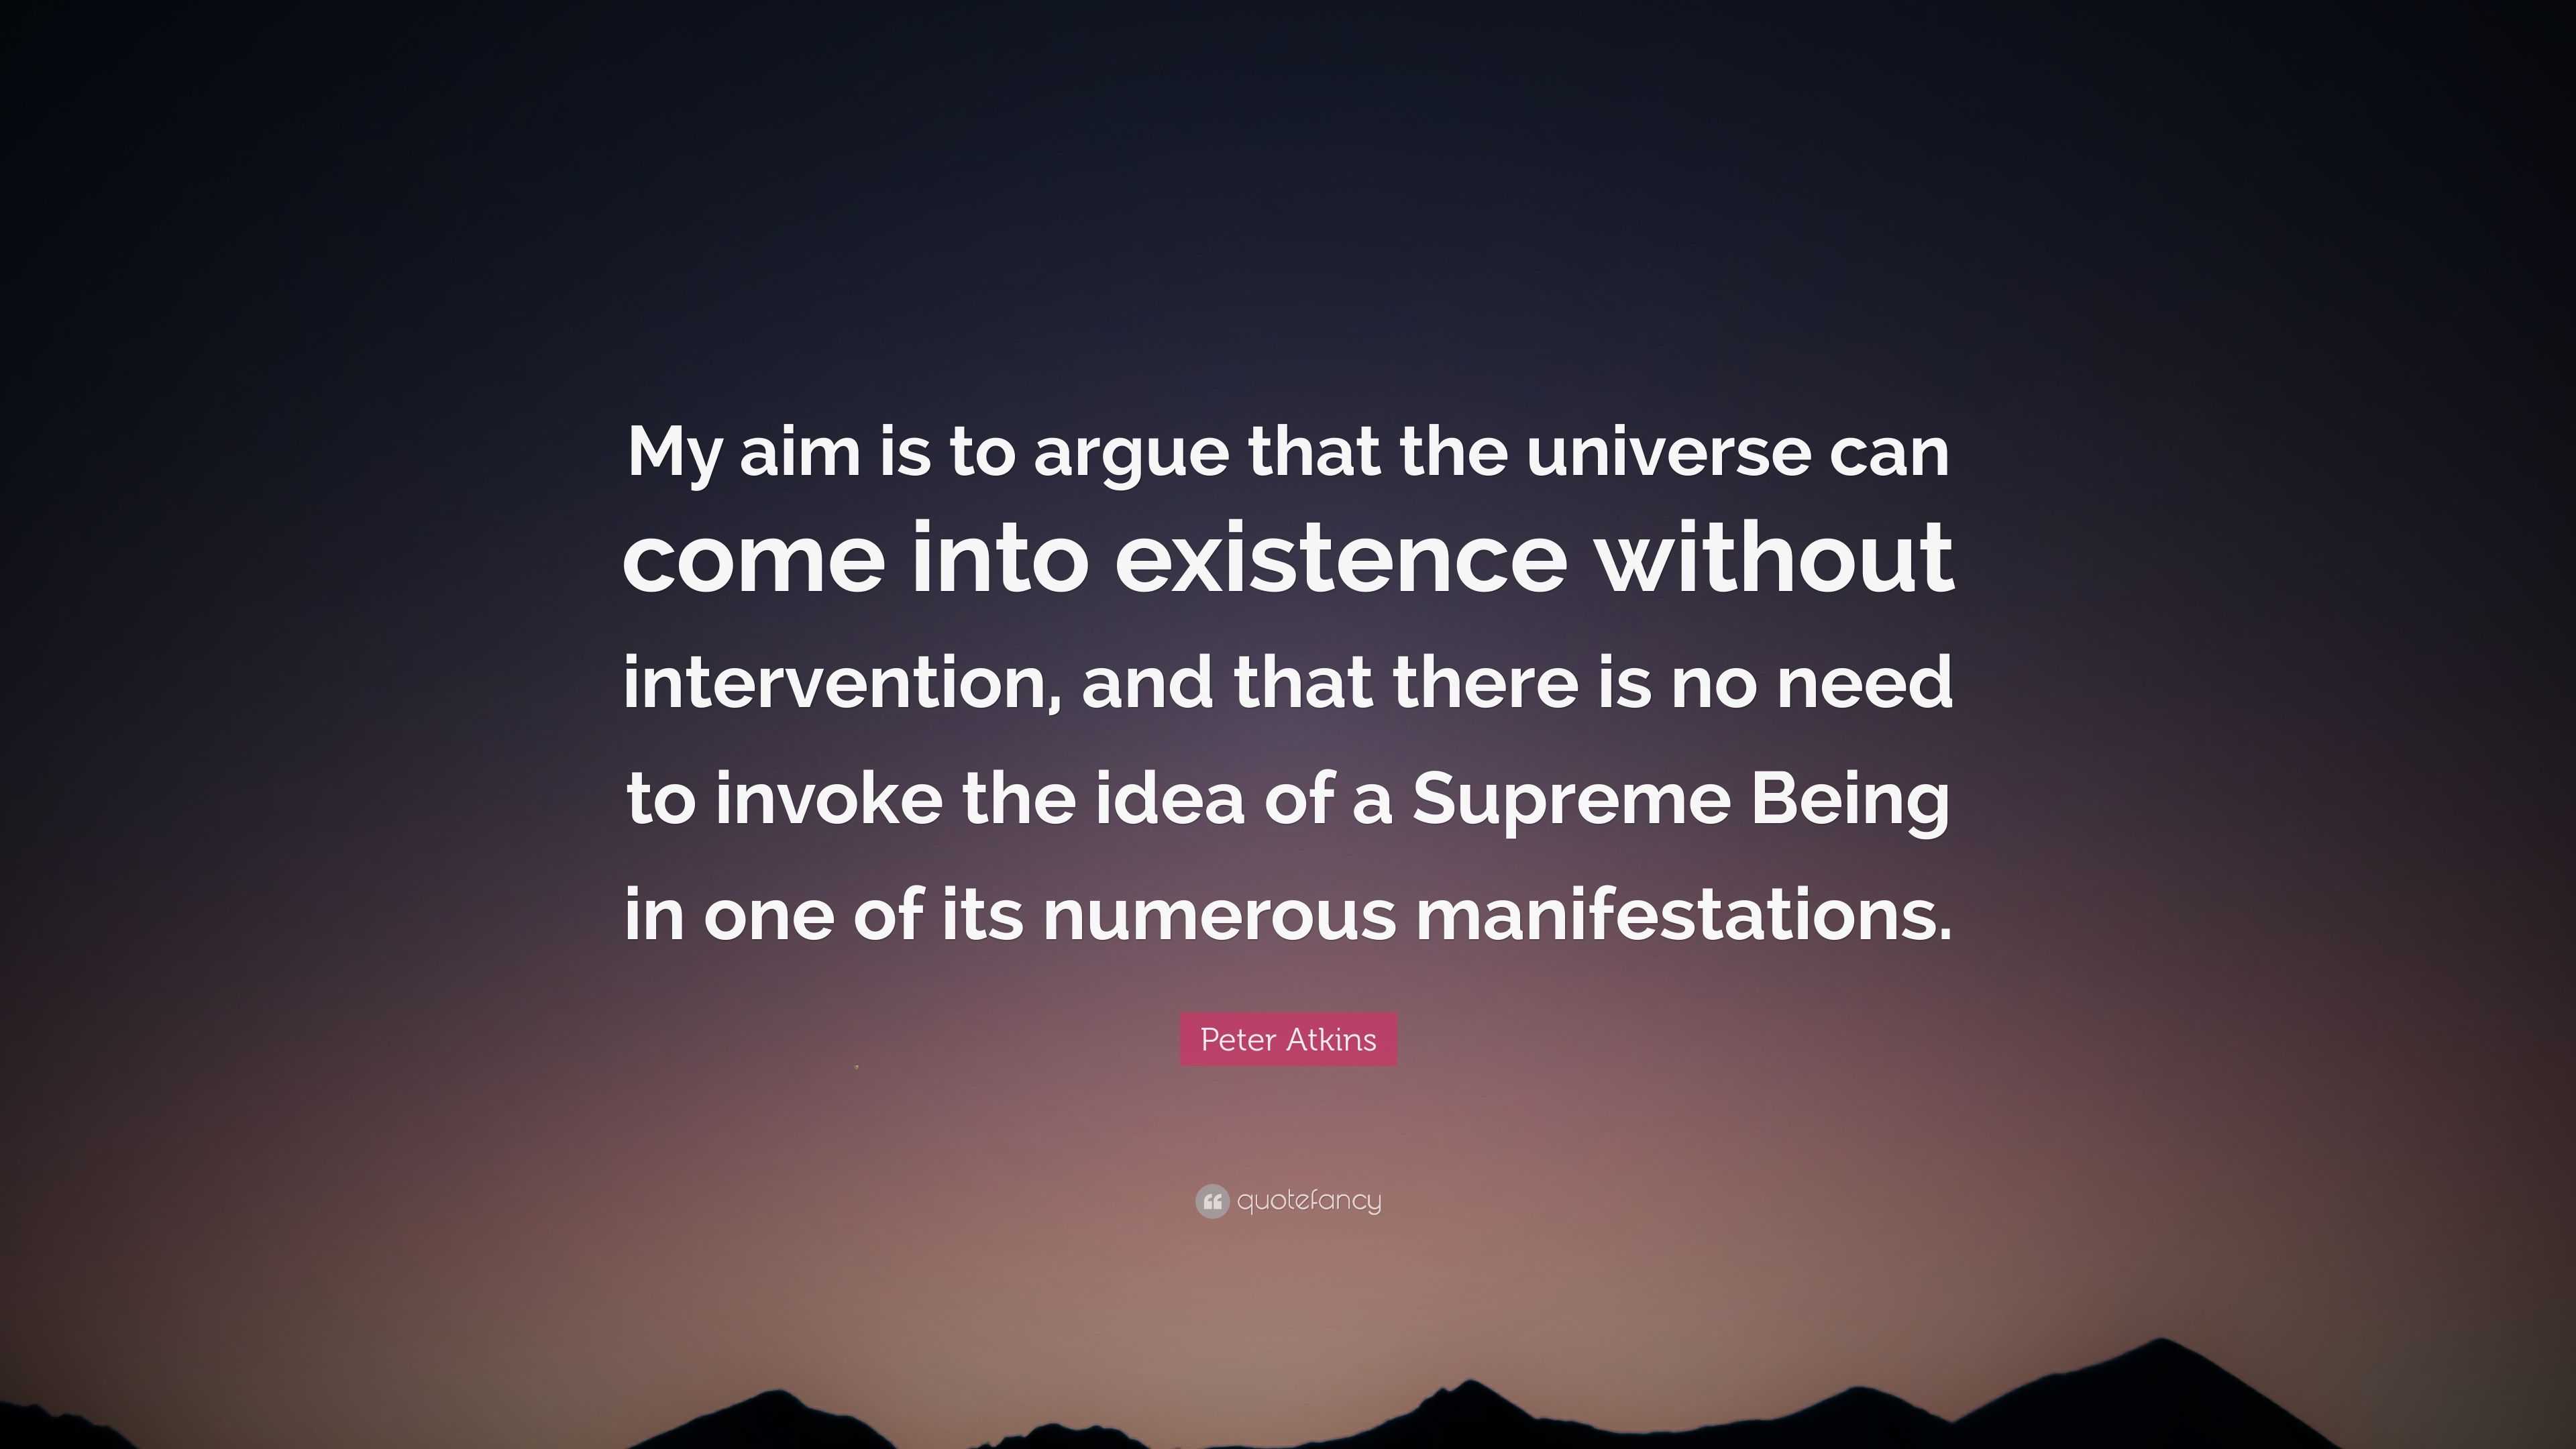 Peter Atkins Quote: “My aim is to argue that the universe can come into ...